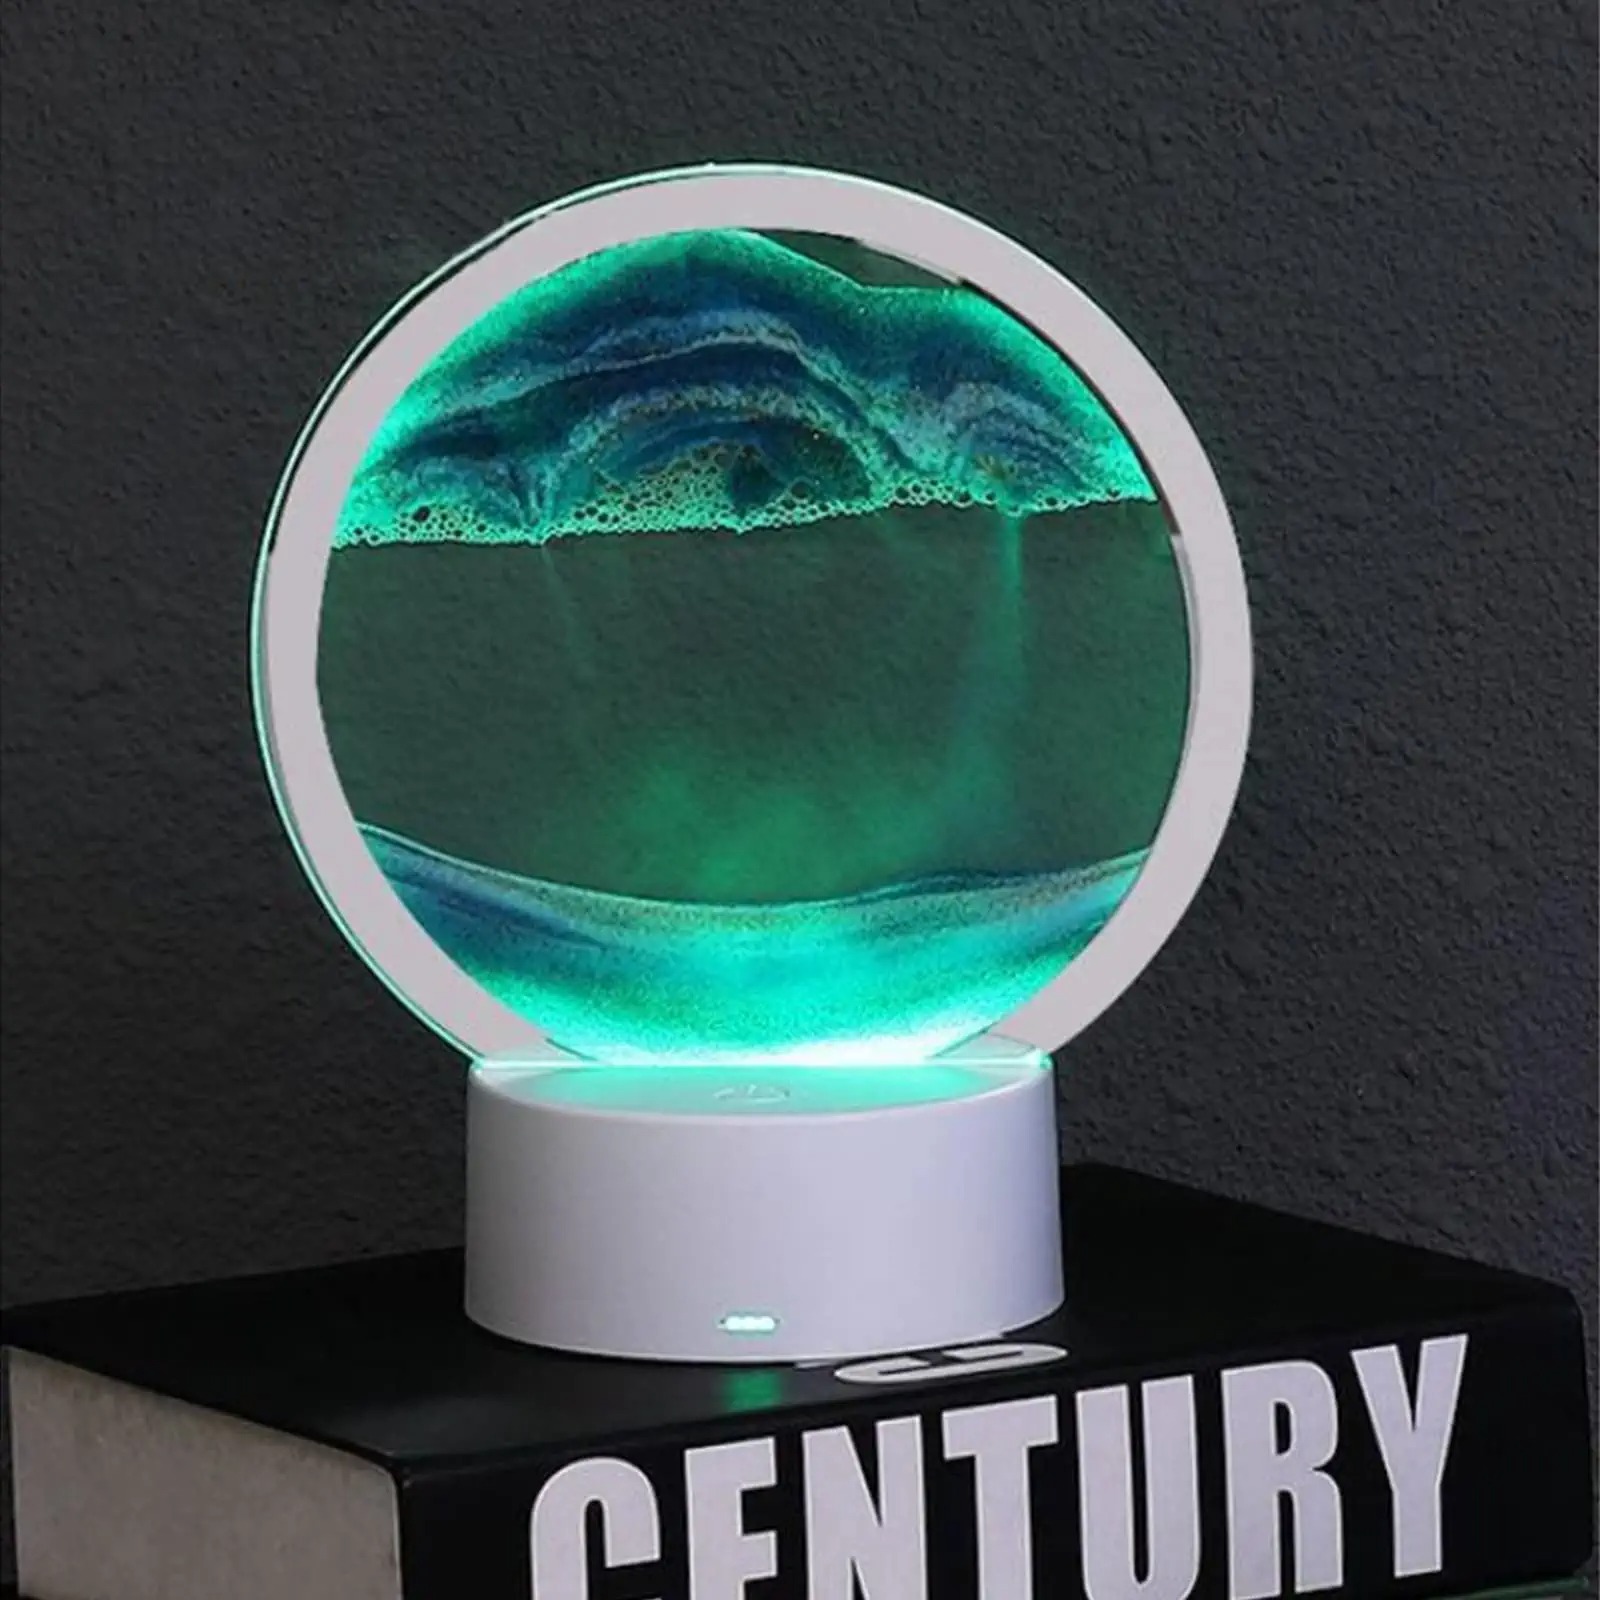 Creative quicksand lamp tabletop decoration dynamic hourglass painting gift 3d night light decompression desk lamp bedroom